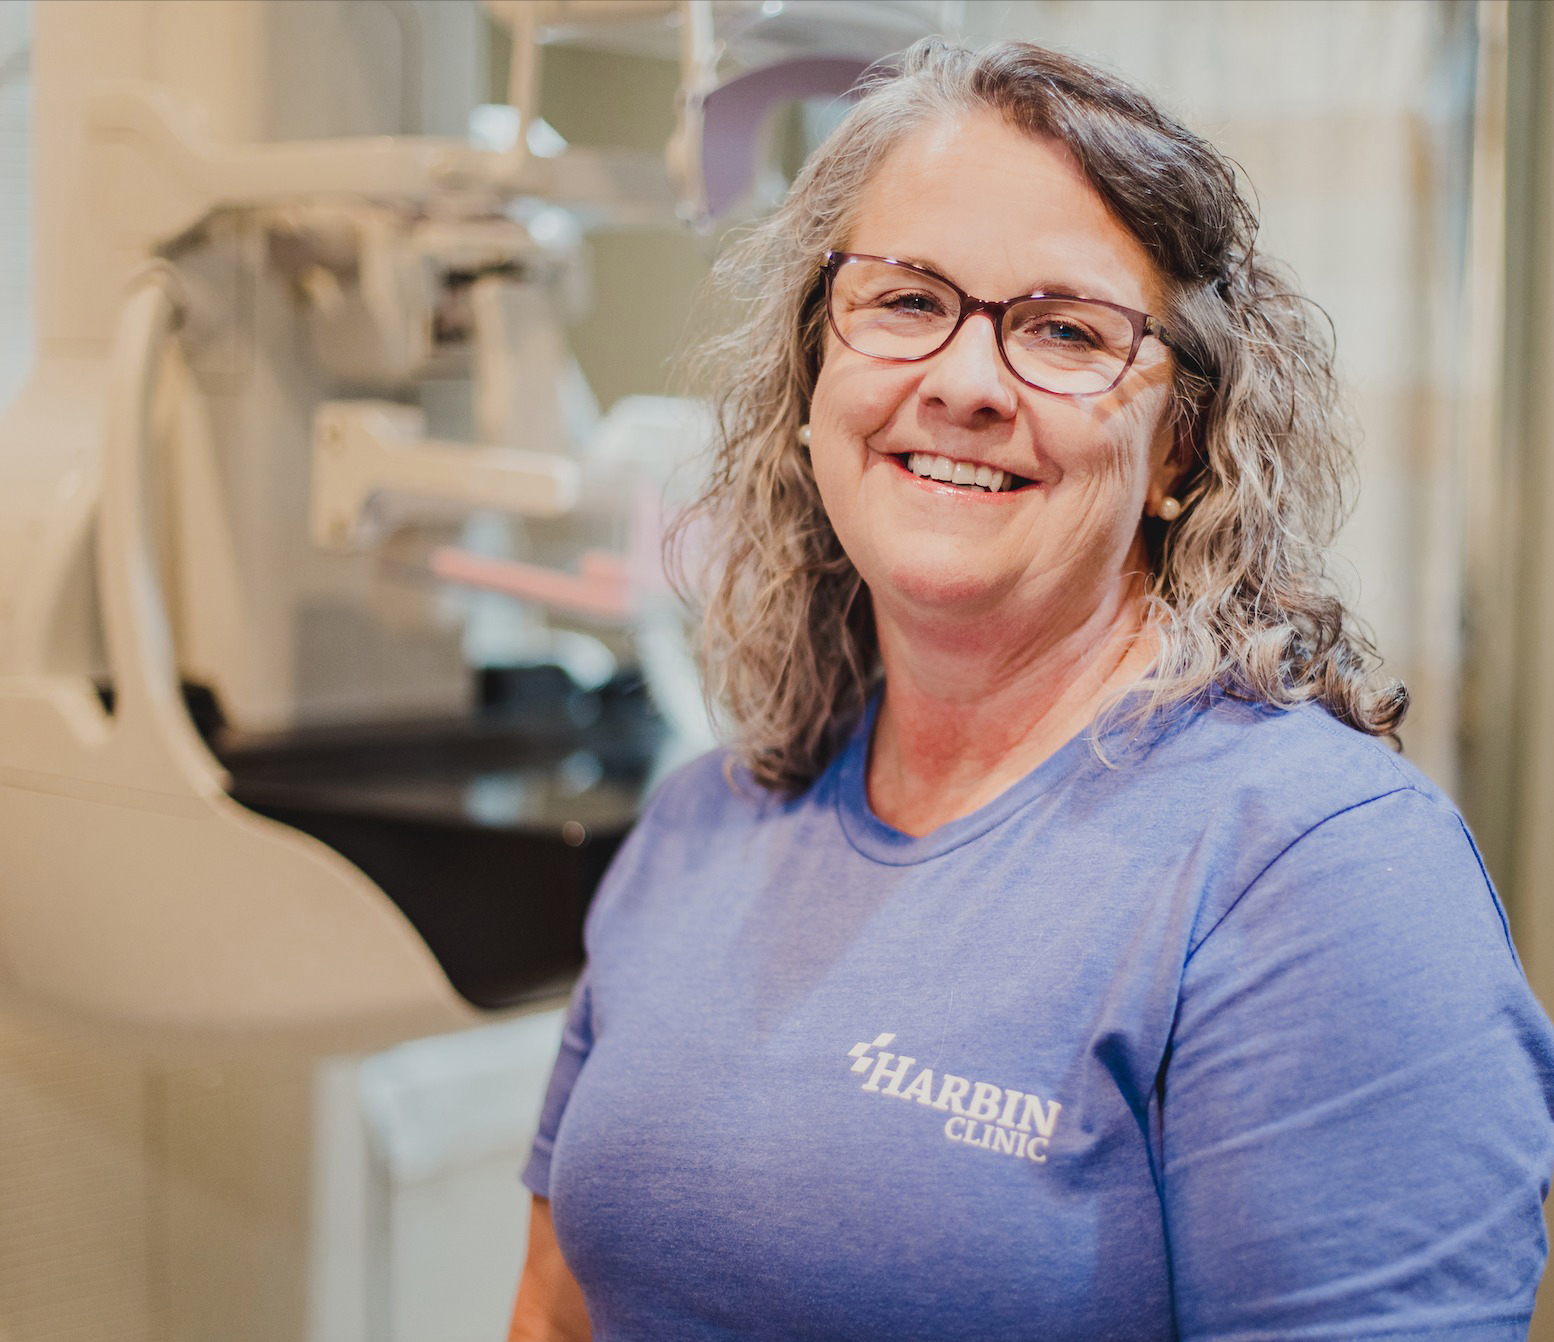 GNTC graduate Kim Raulerson, a breast cancer survivor, is employed with Harbin Clinic in Cartersville as lead mammogram technician. (Photo courtesy of Harbin Clinic)